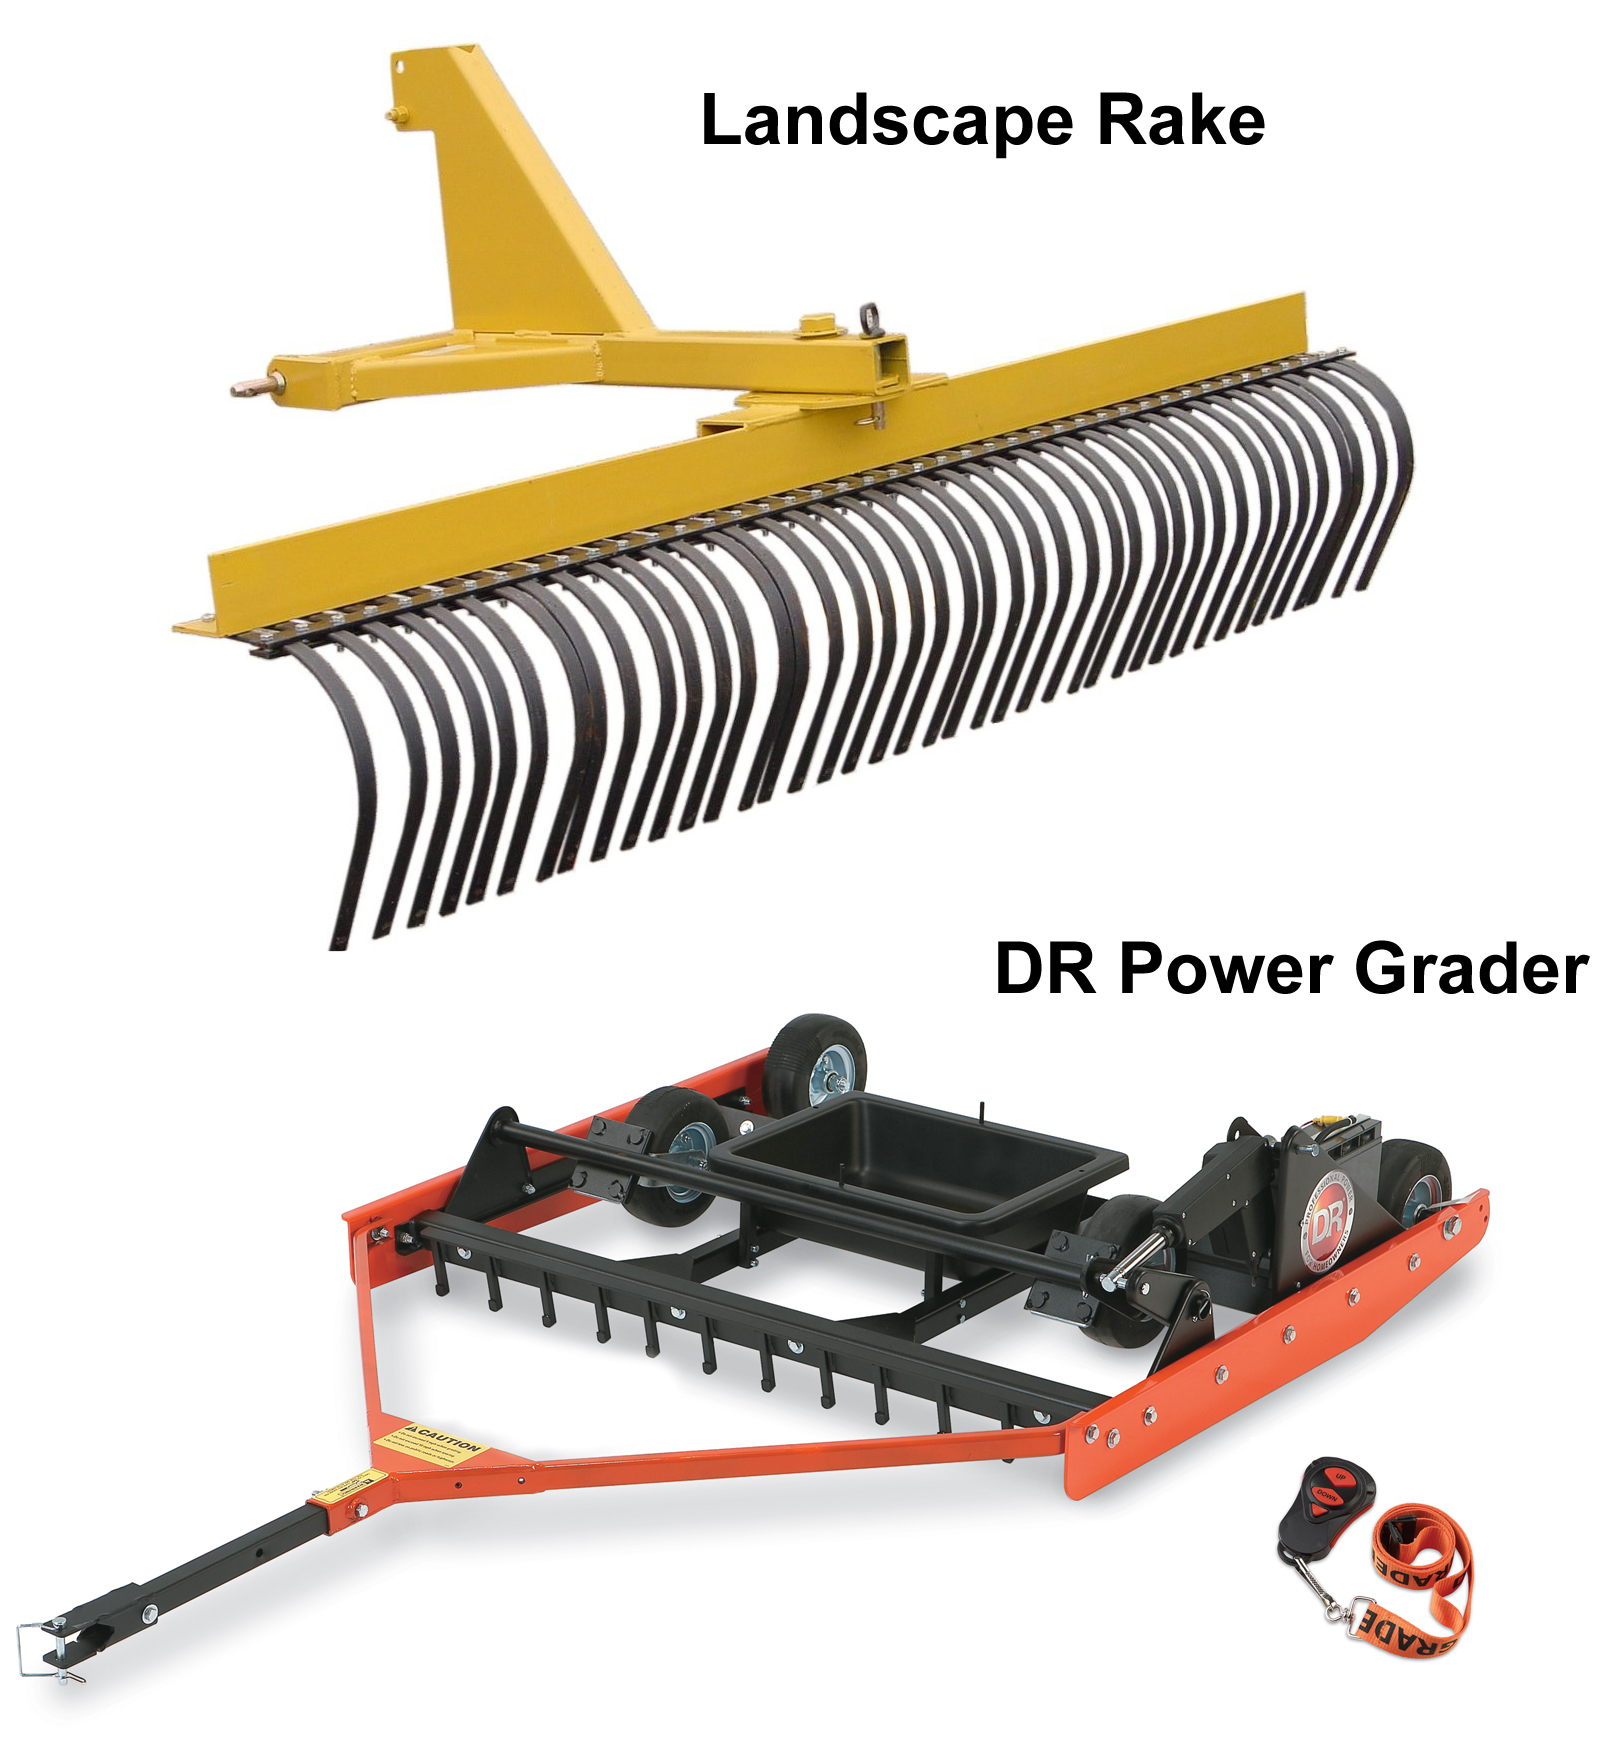 Using the DR Power Grader as a Landscape Rake - DR's Country Life Blog